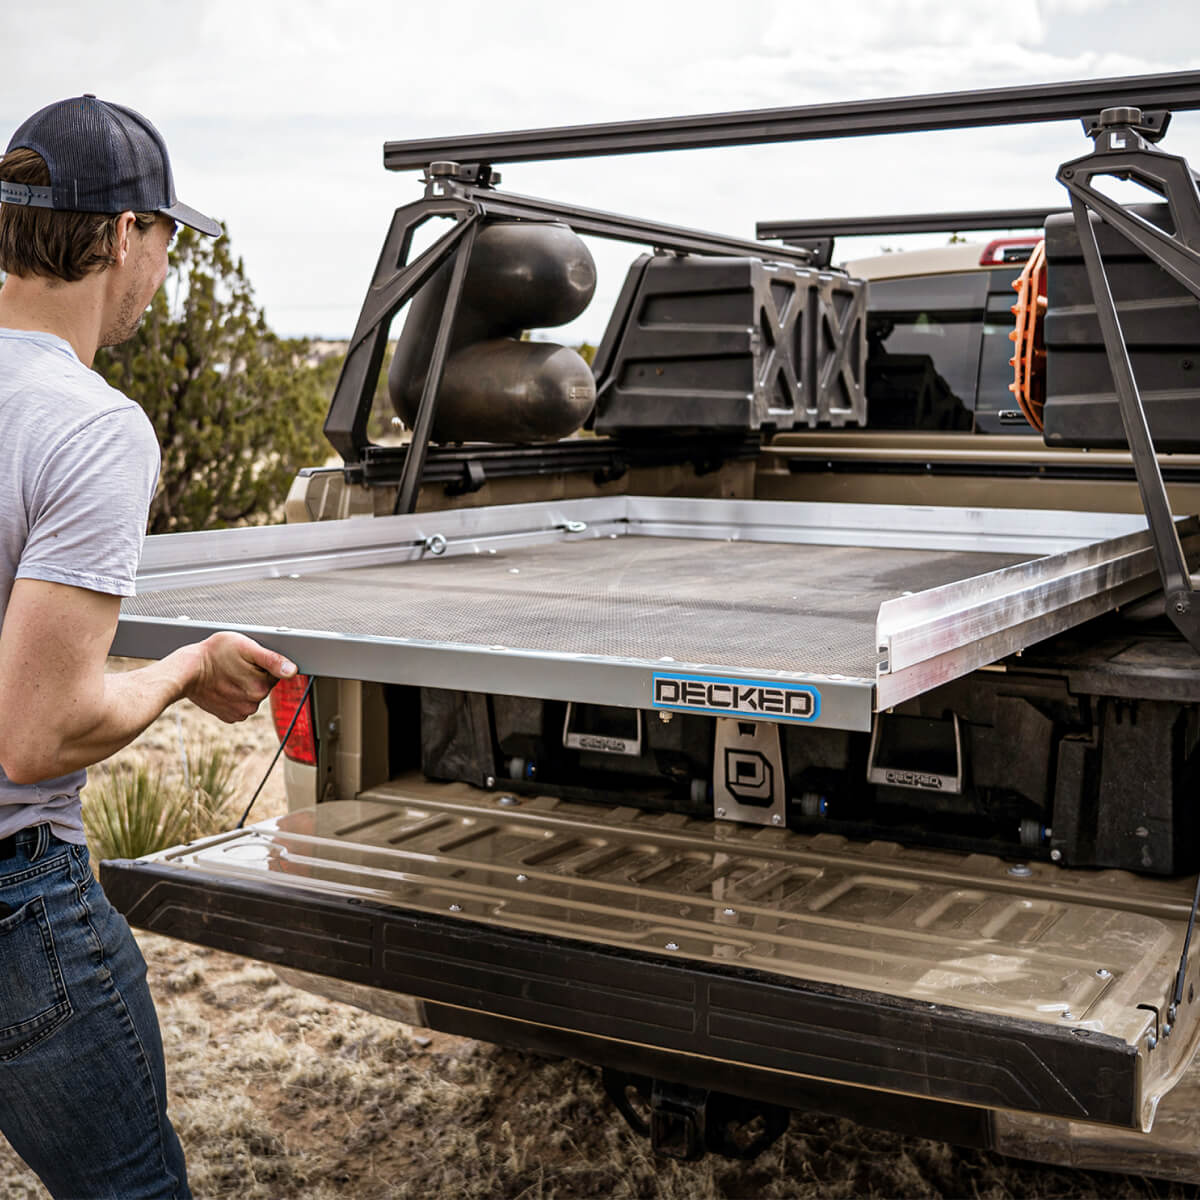 Truck Bed Storage & Organizer System For Fishing